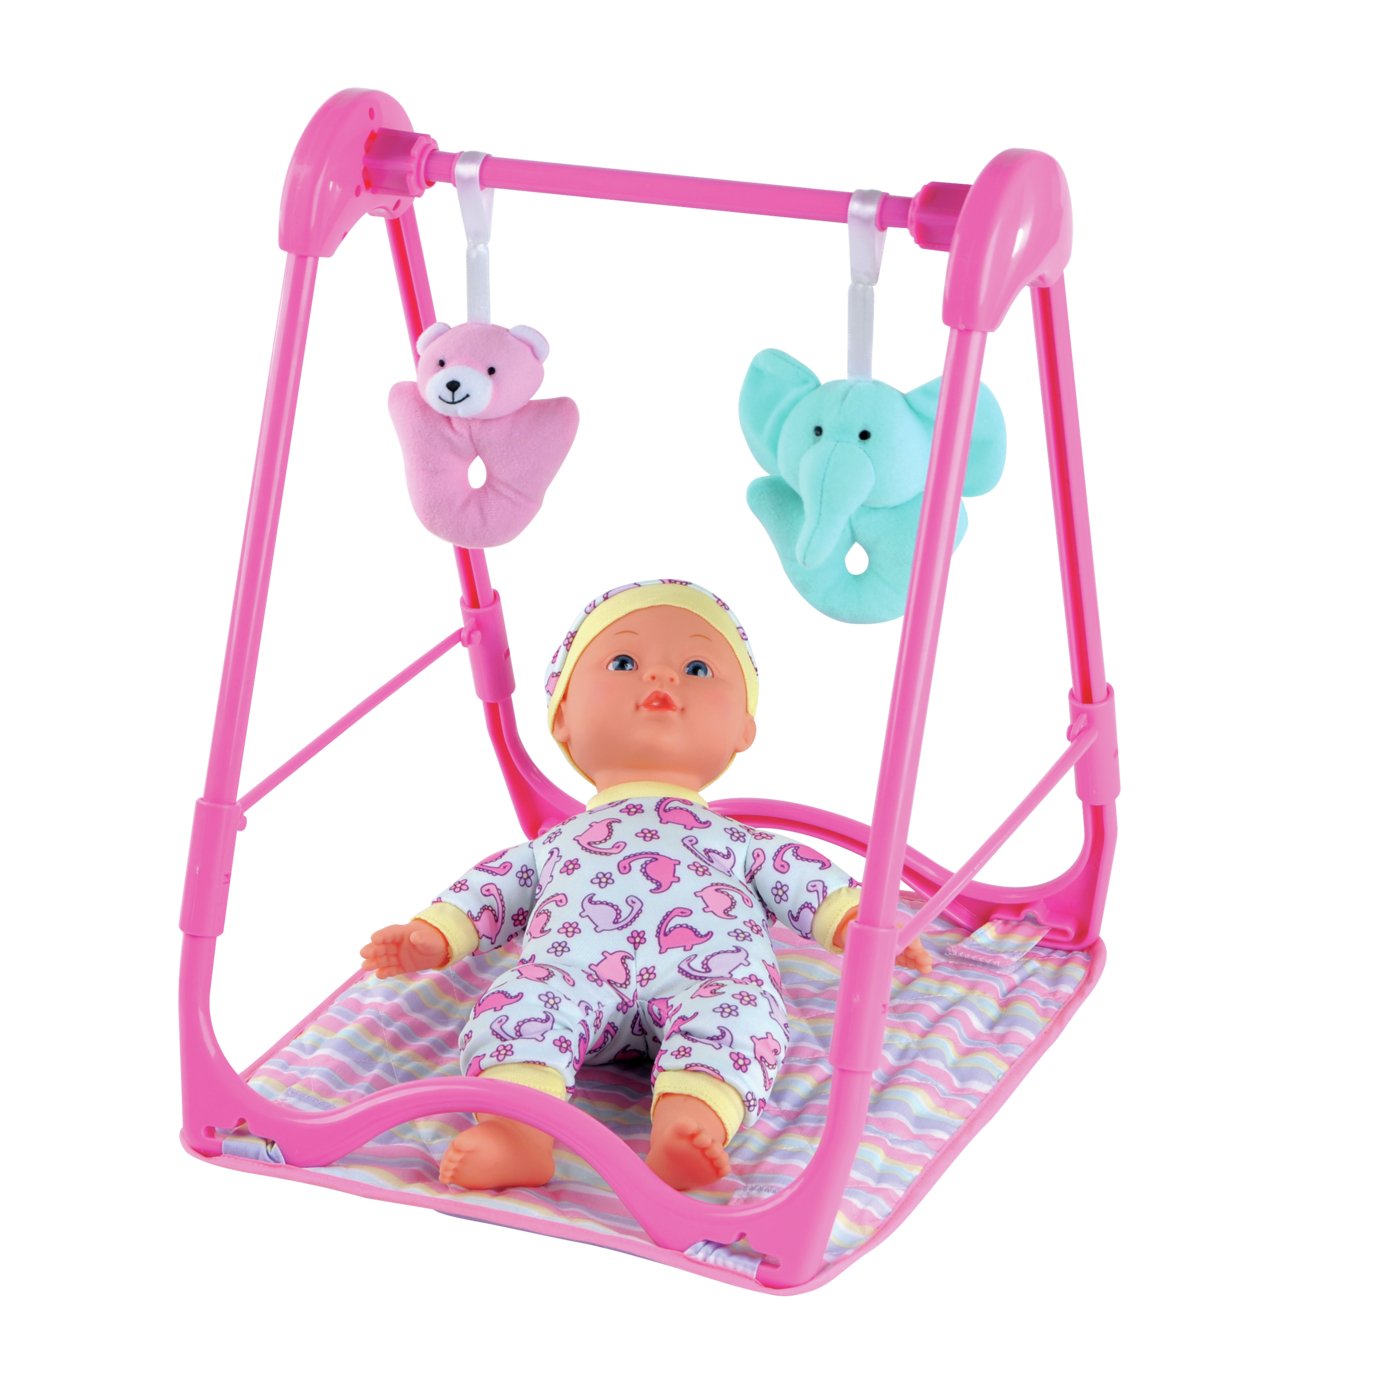 Chad Valley Babies to Love 4-in-1 Swing Review